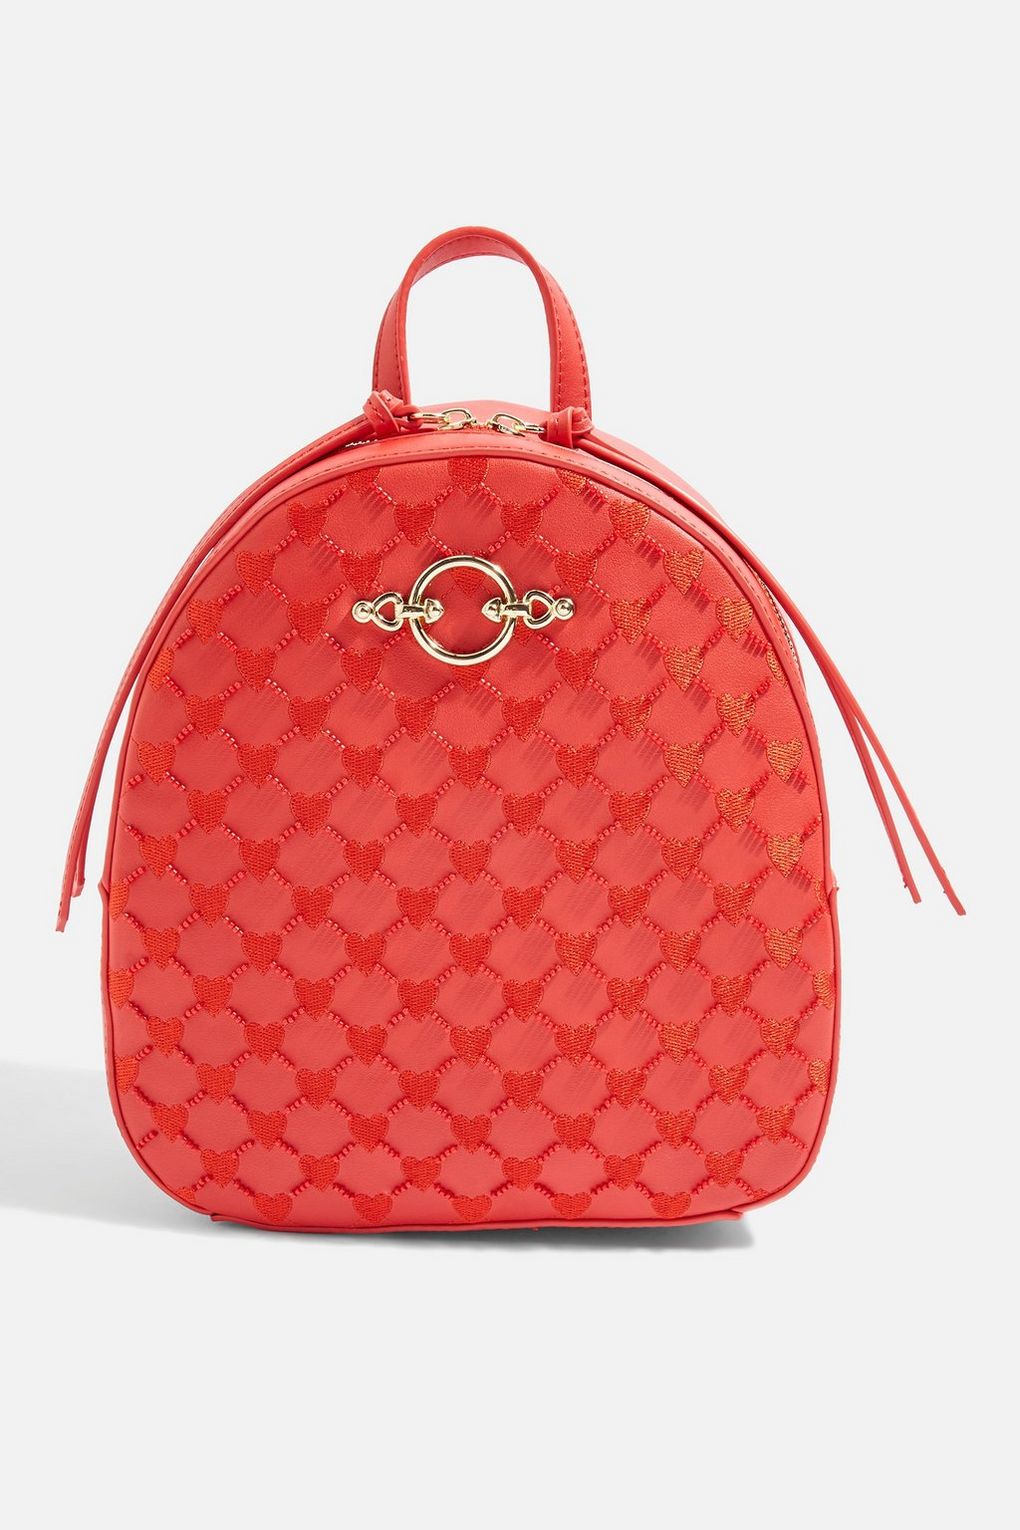 5 Gucci Bag Dupes That Are Better Than The Original–& SO Much More Affordable! - SHEfinds